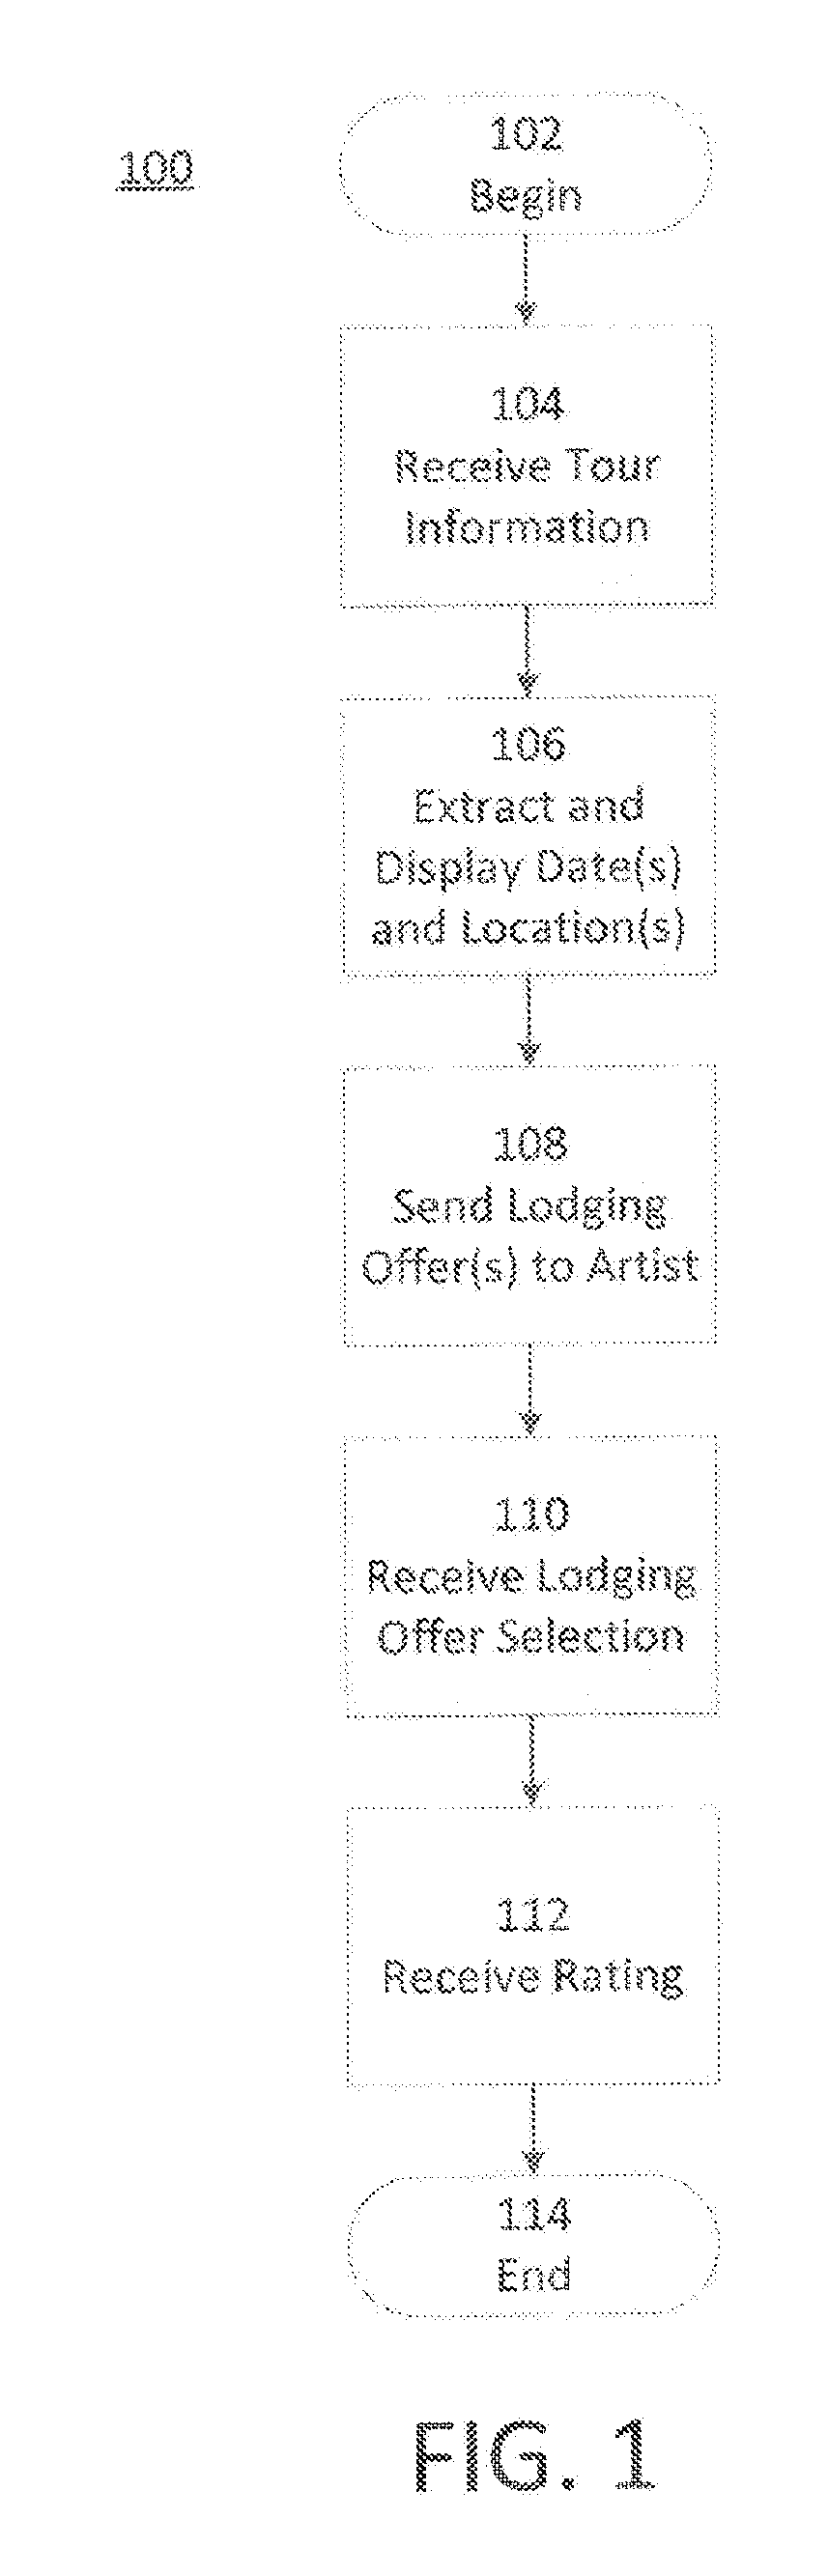 System and method for finding lodging for touring artists